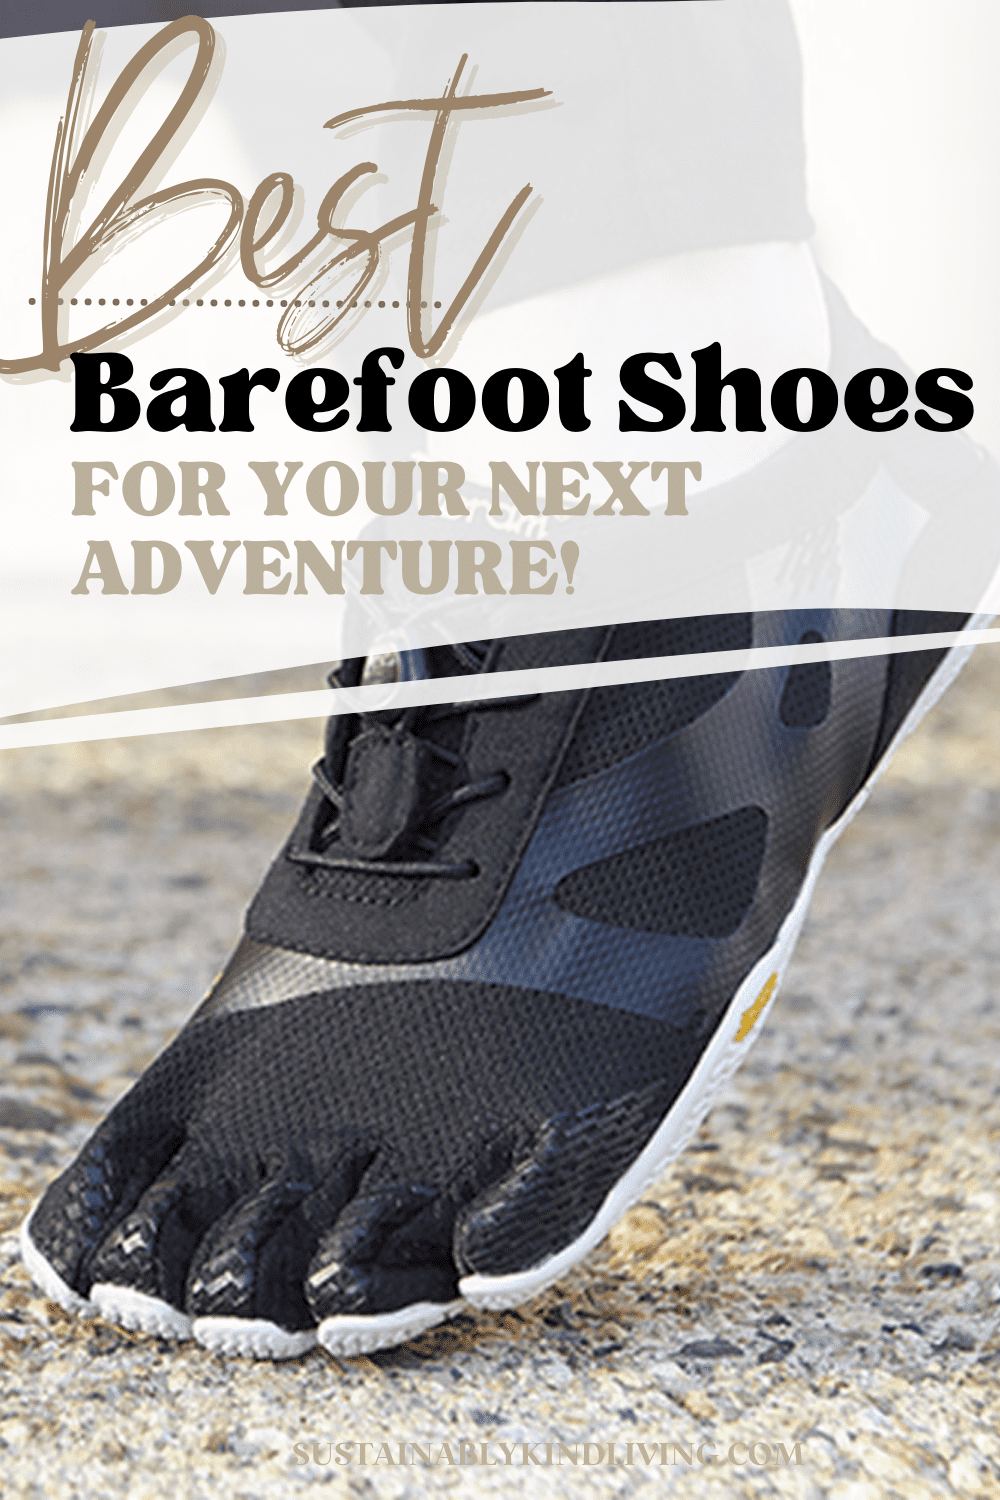 15 Best Barefoot Shoes For Healthier Feet in 2022 • Sustainably Kind Living